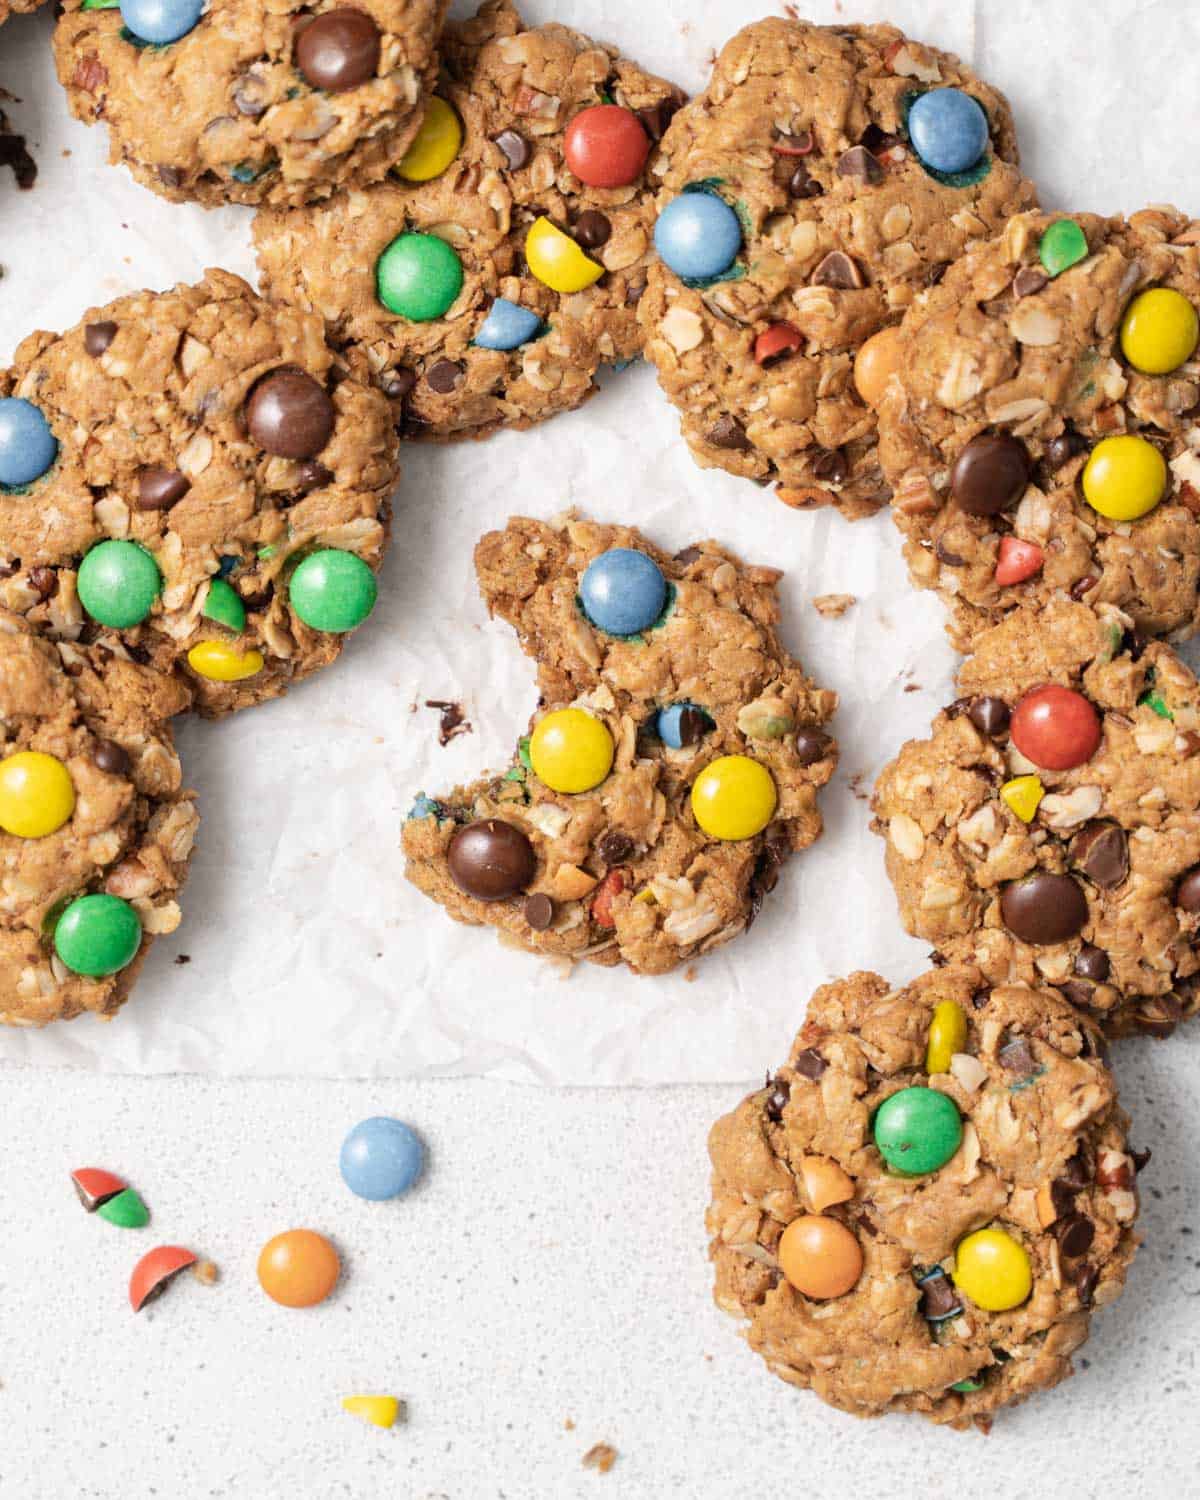 Oatmeal cookies with M&M's and chocolate chips on parchment paper.